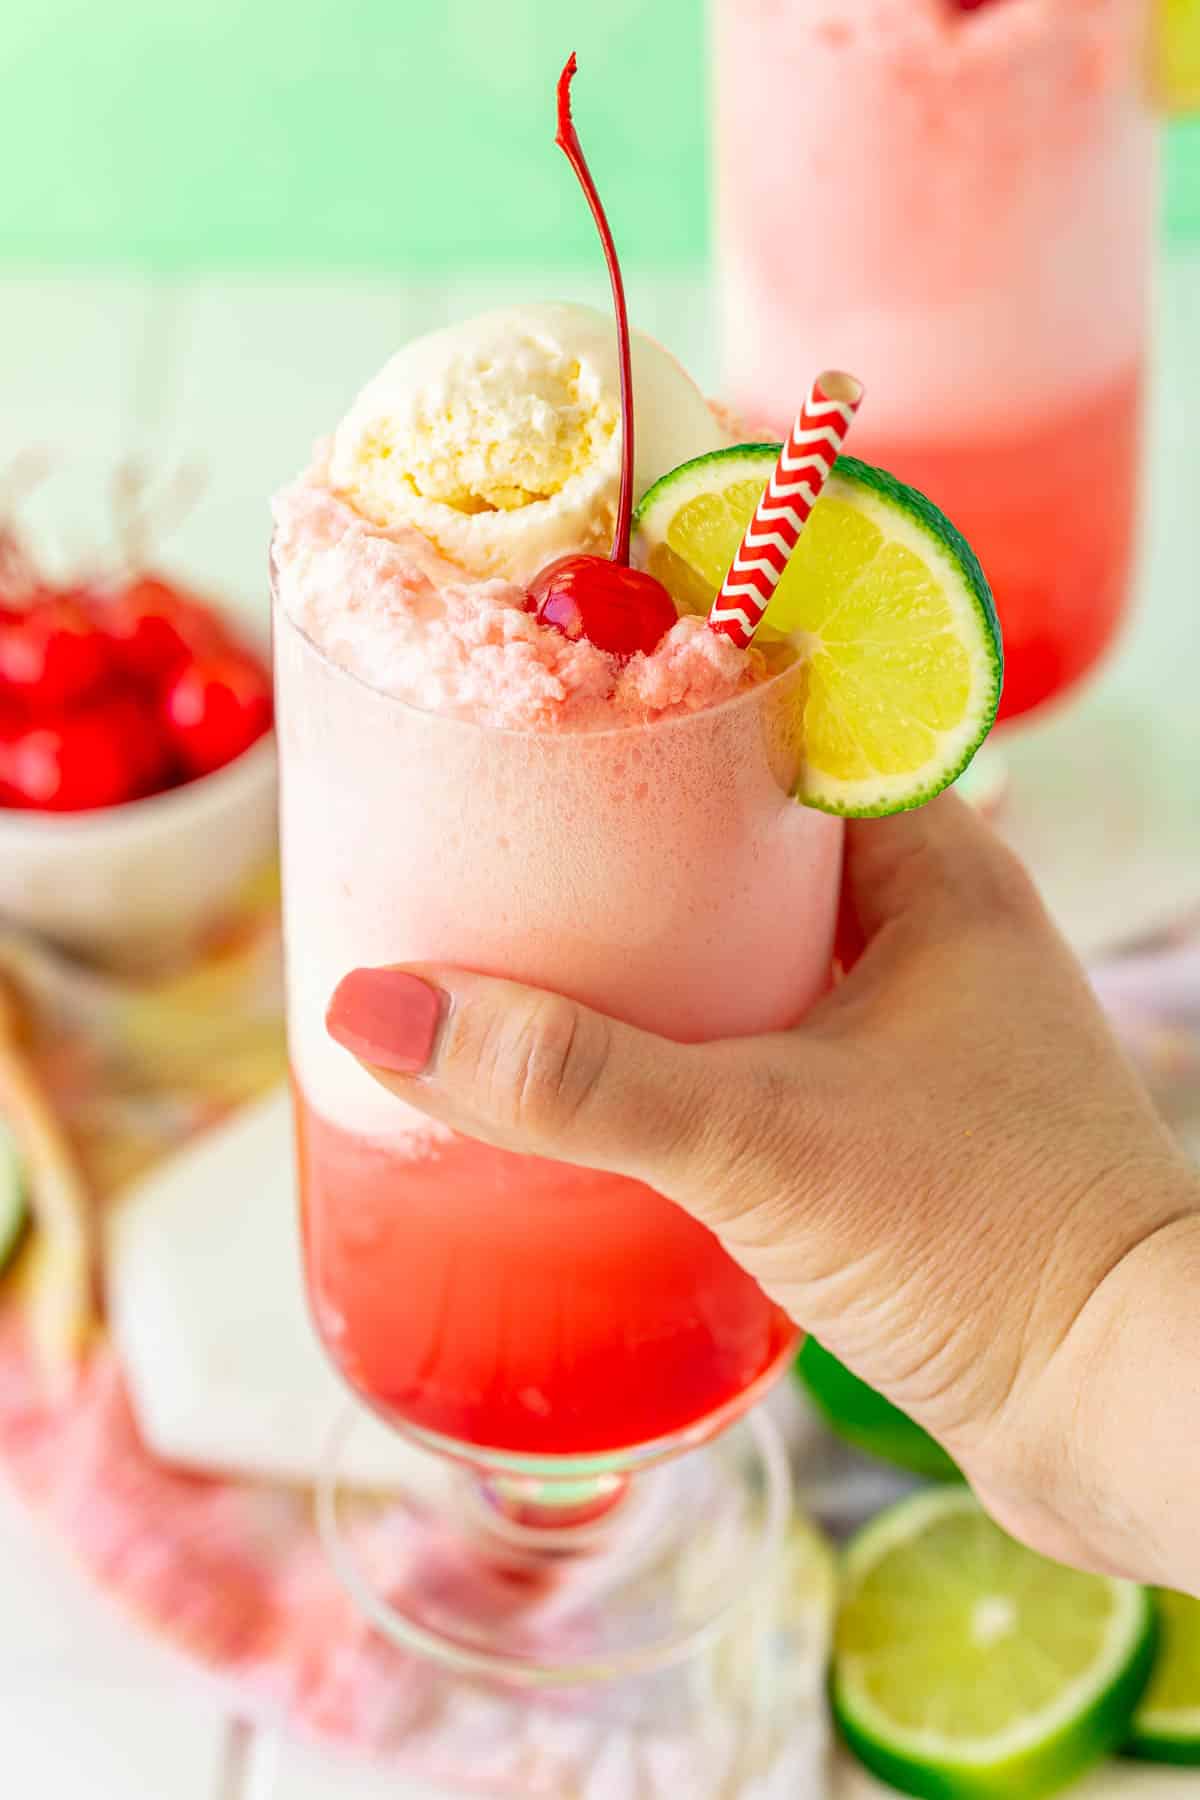 A woman's hand holding a glass filled with a shirley temple float to the camera.